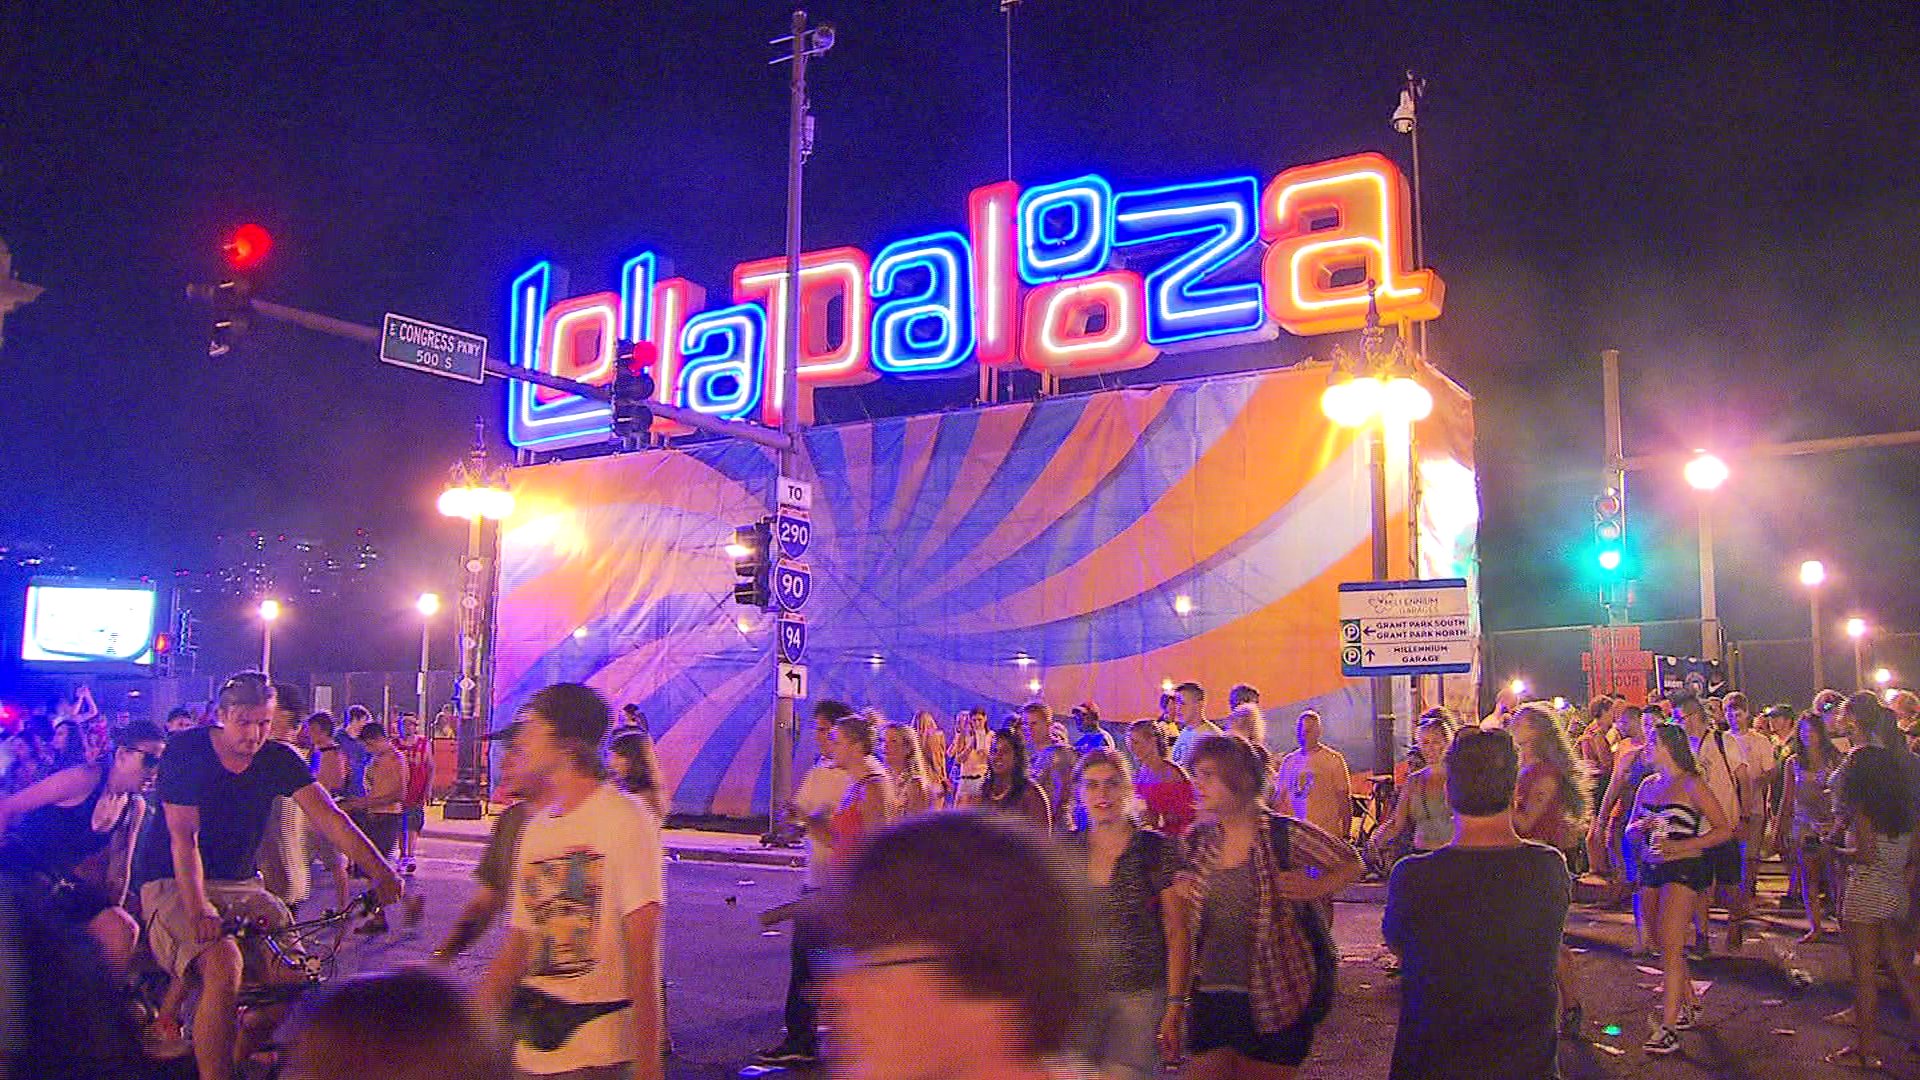 Lollapalooza used to tour all over the nation but now resides in Chicago at the beginning of August.